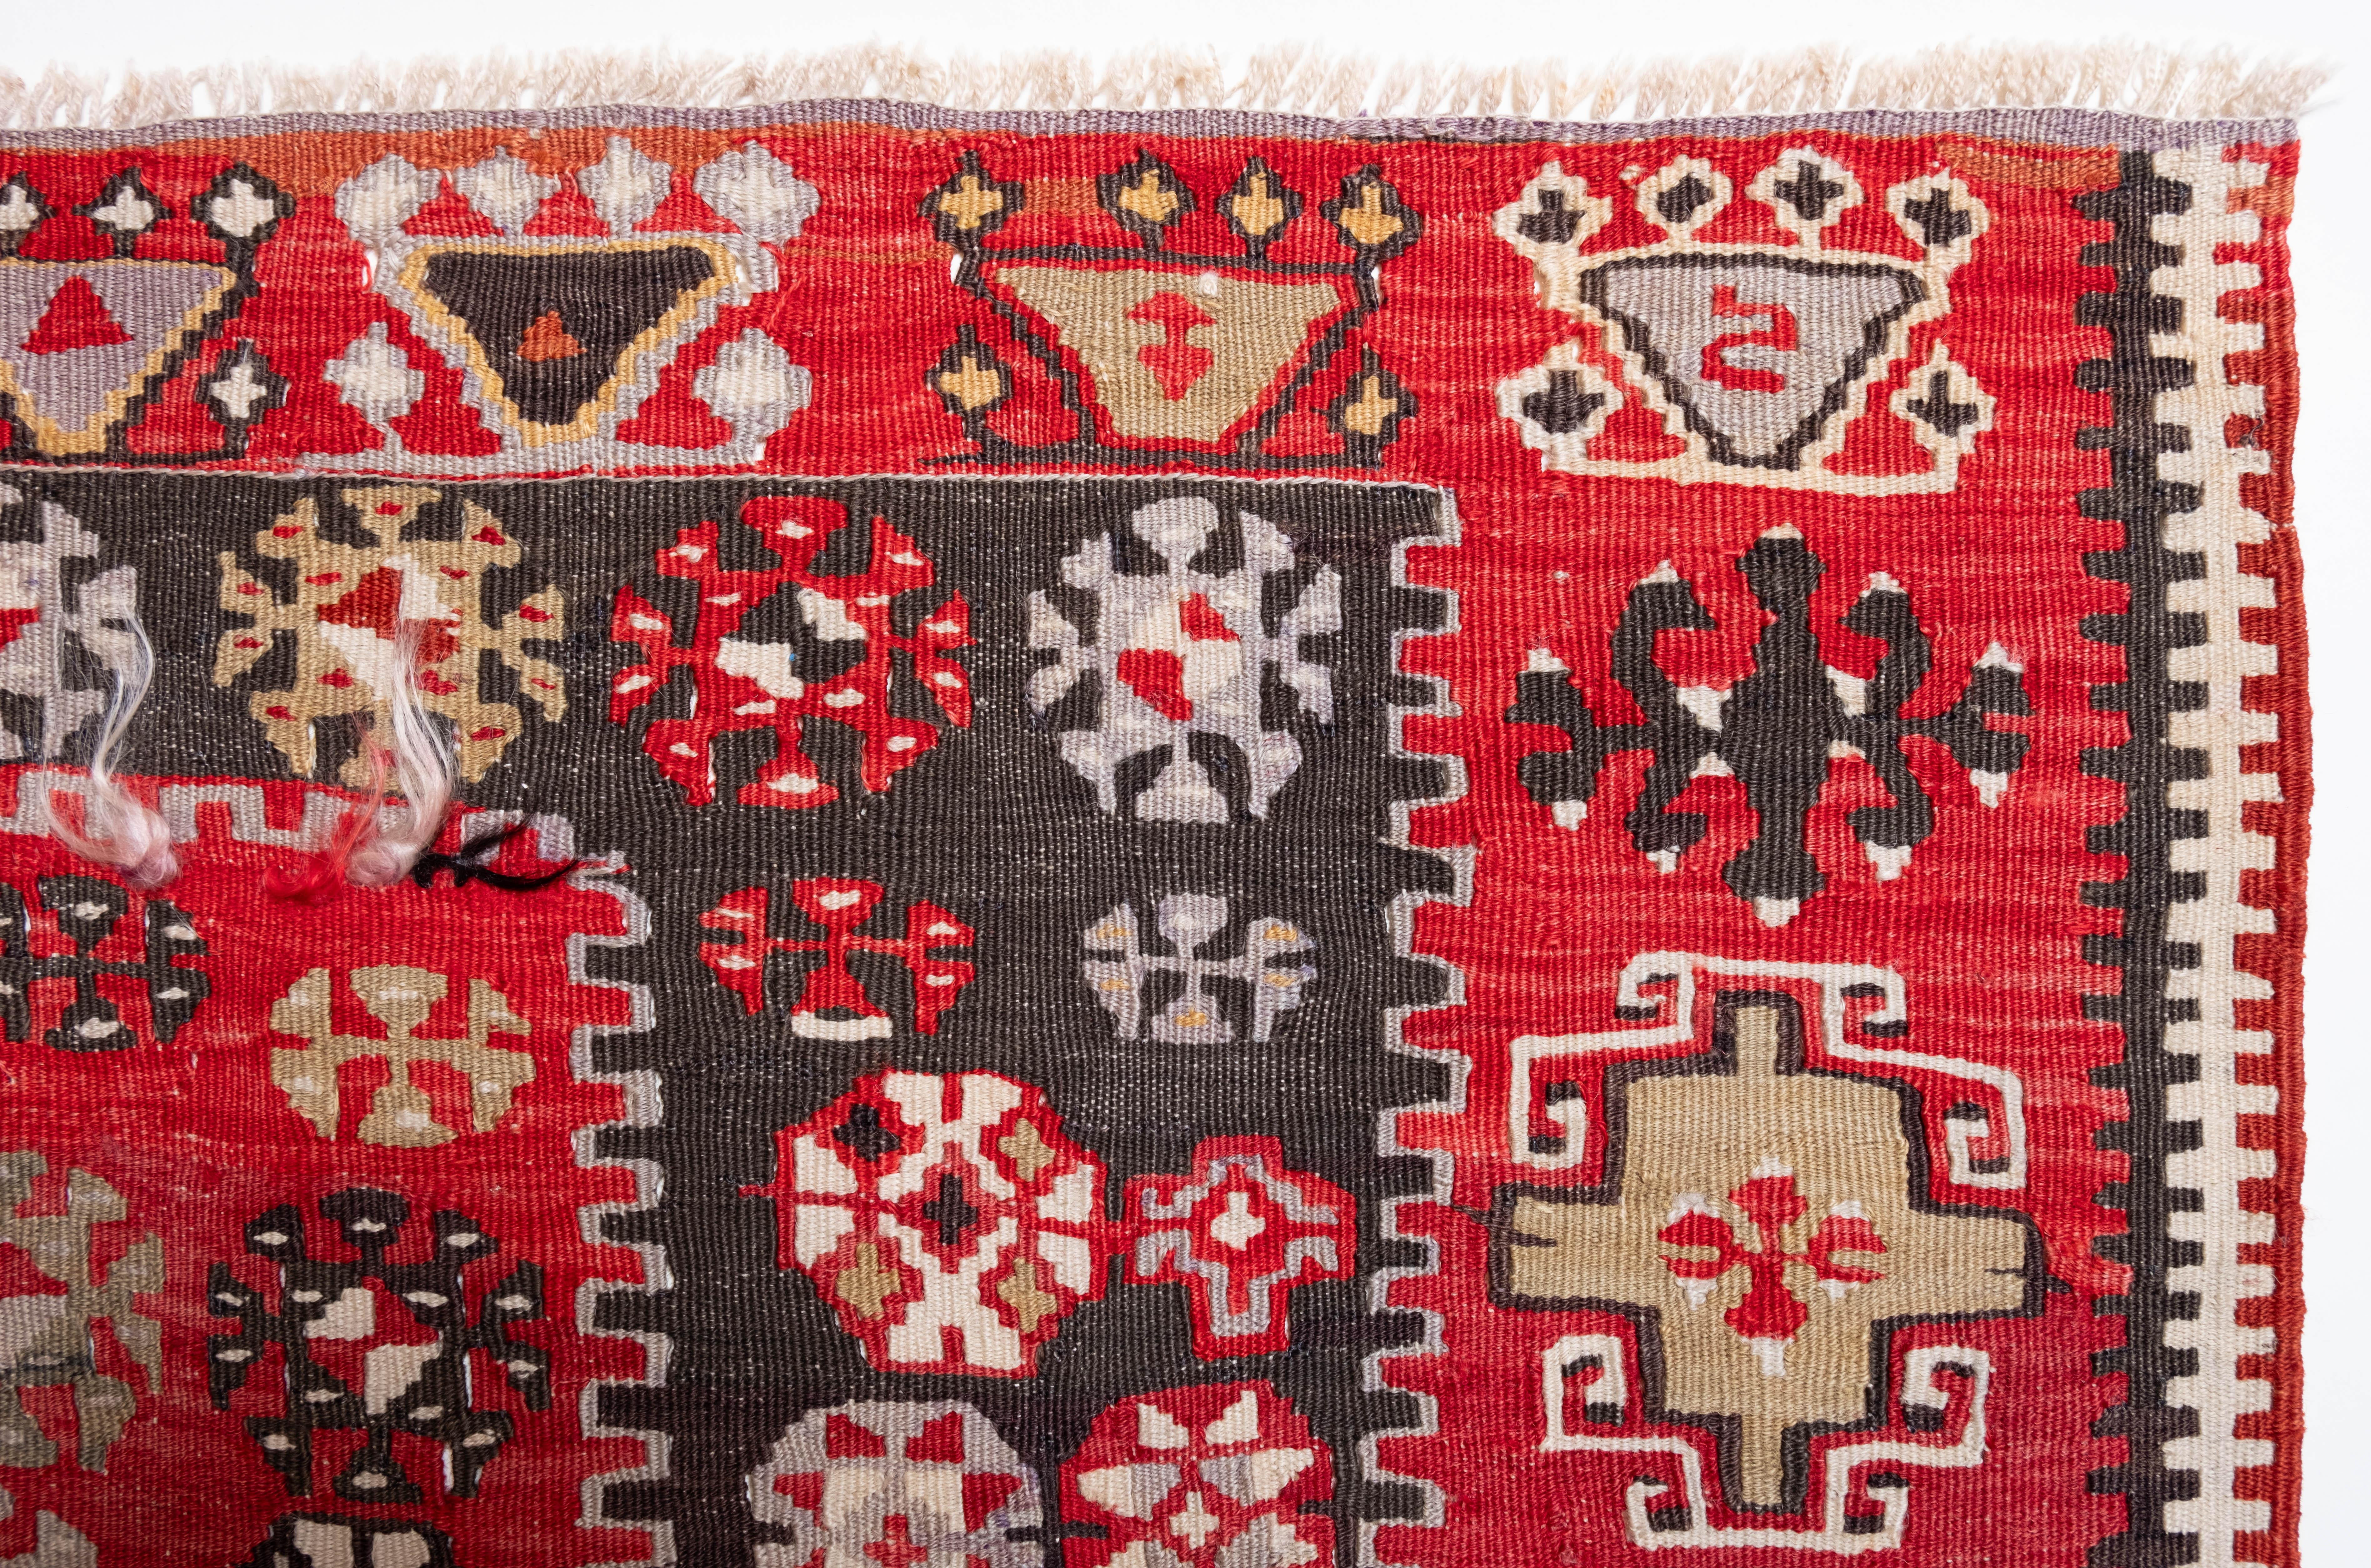 This is Central Anatolian Antique Kilim from the Gomurgen, Kayseri region with a rare and beautiful color composition.

This highly collectible antique kilim has wonderful special colors and textures that are typical of an old kilim in good